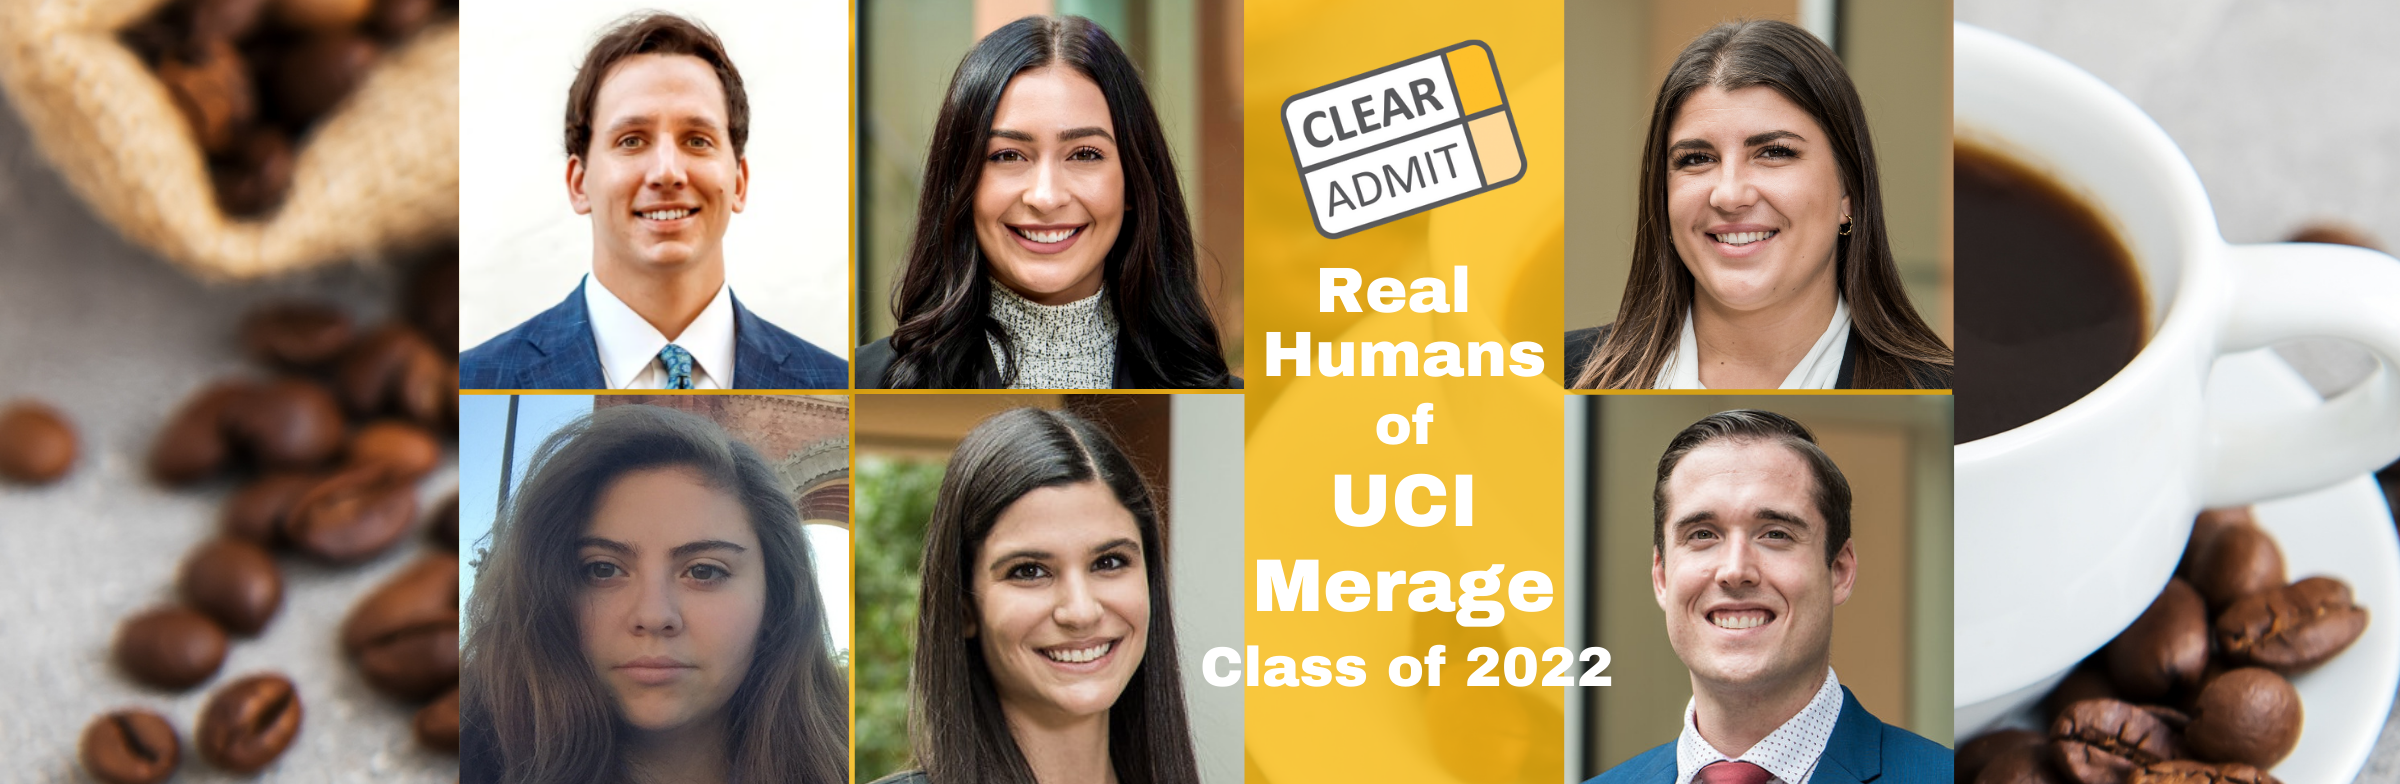 Image for Real Humans of UCI Merage’s MBA Class of 2022